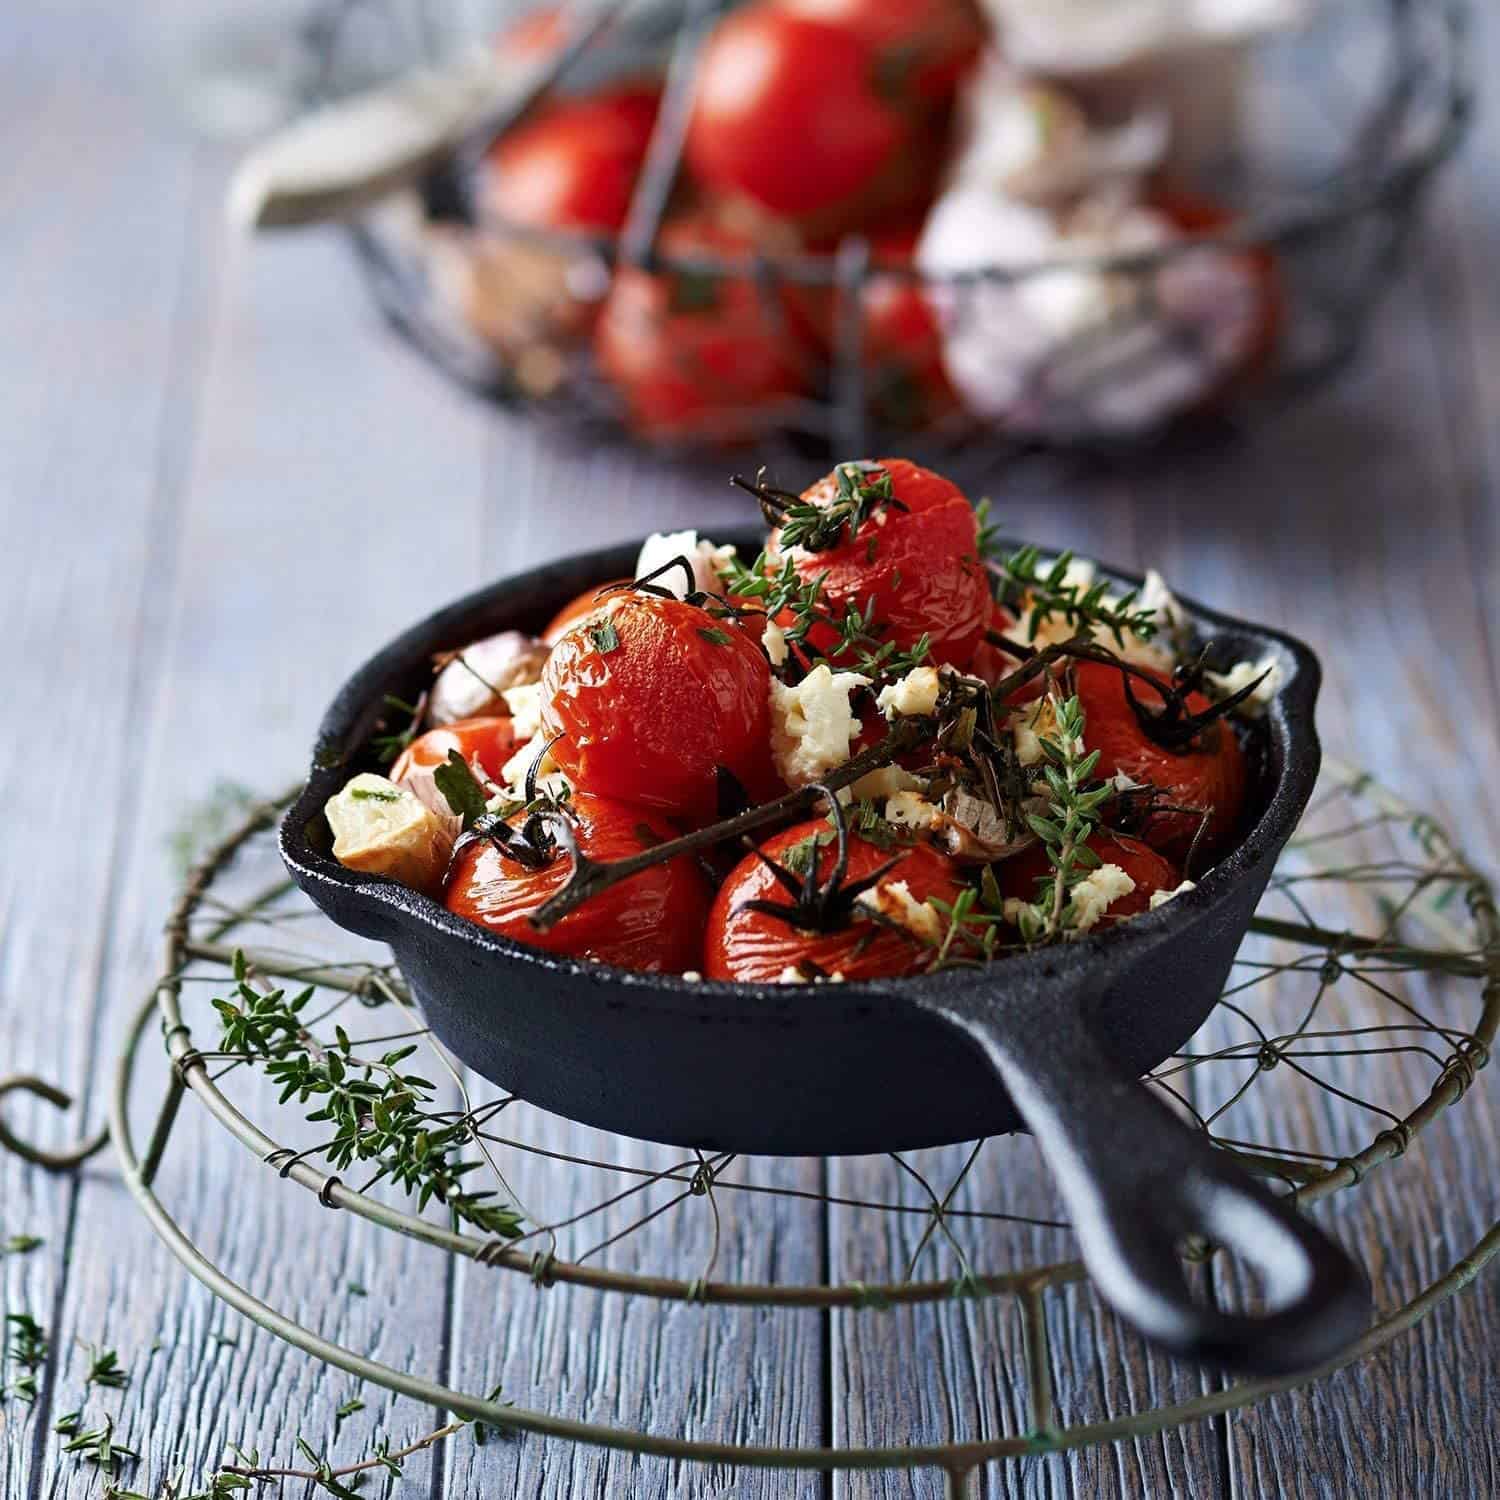 Mini cast iron pan from Simple Chef full of roasted cherry tomatoes on the vine, topped with herbs and crumbled cheese.